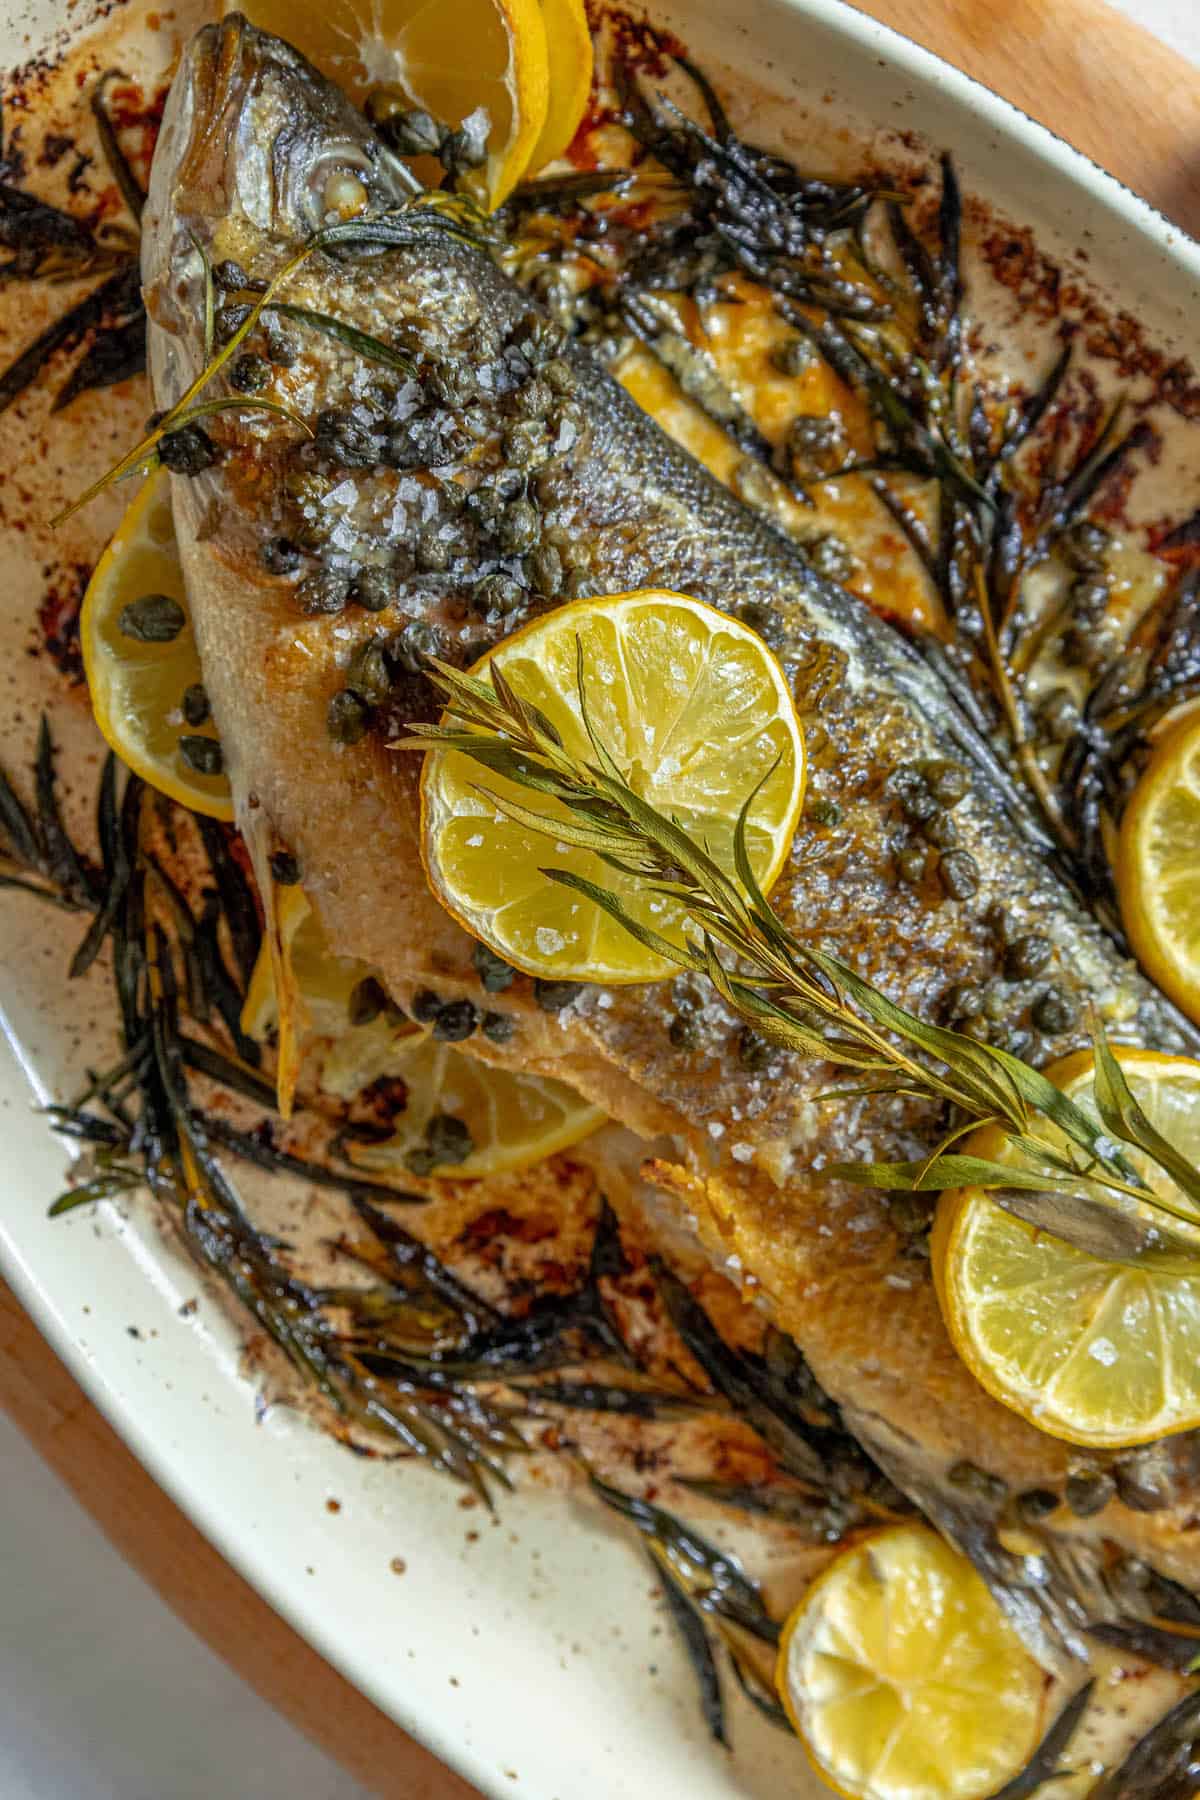 A roasted Branzino fish with lemon slices on a plate.